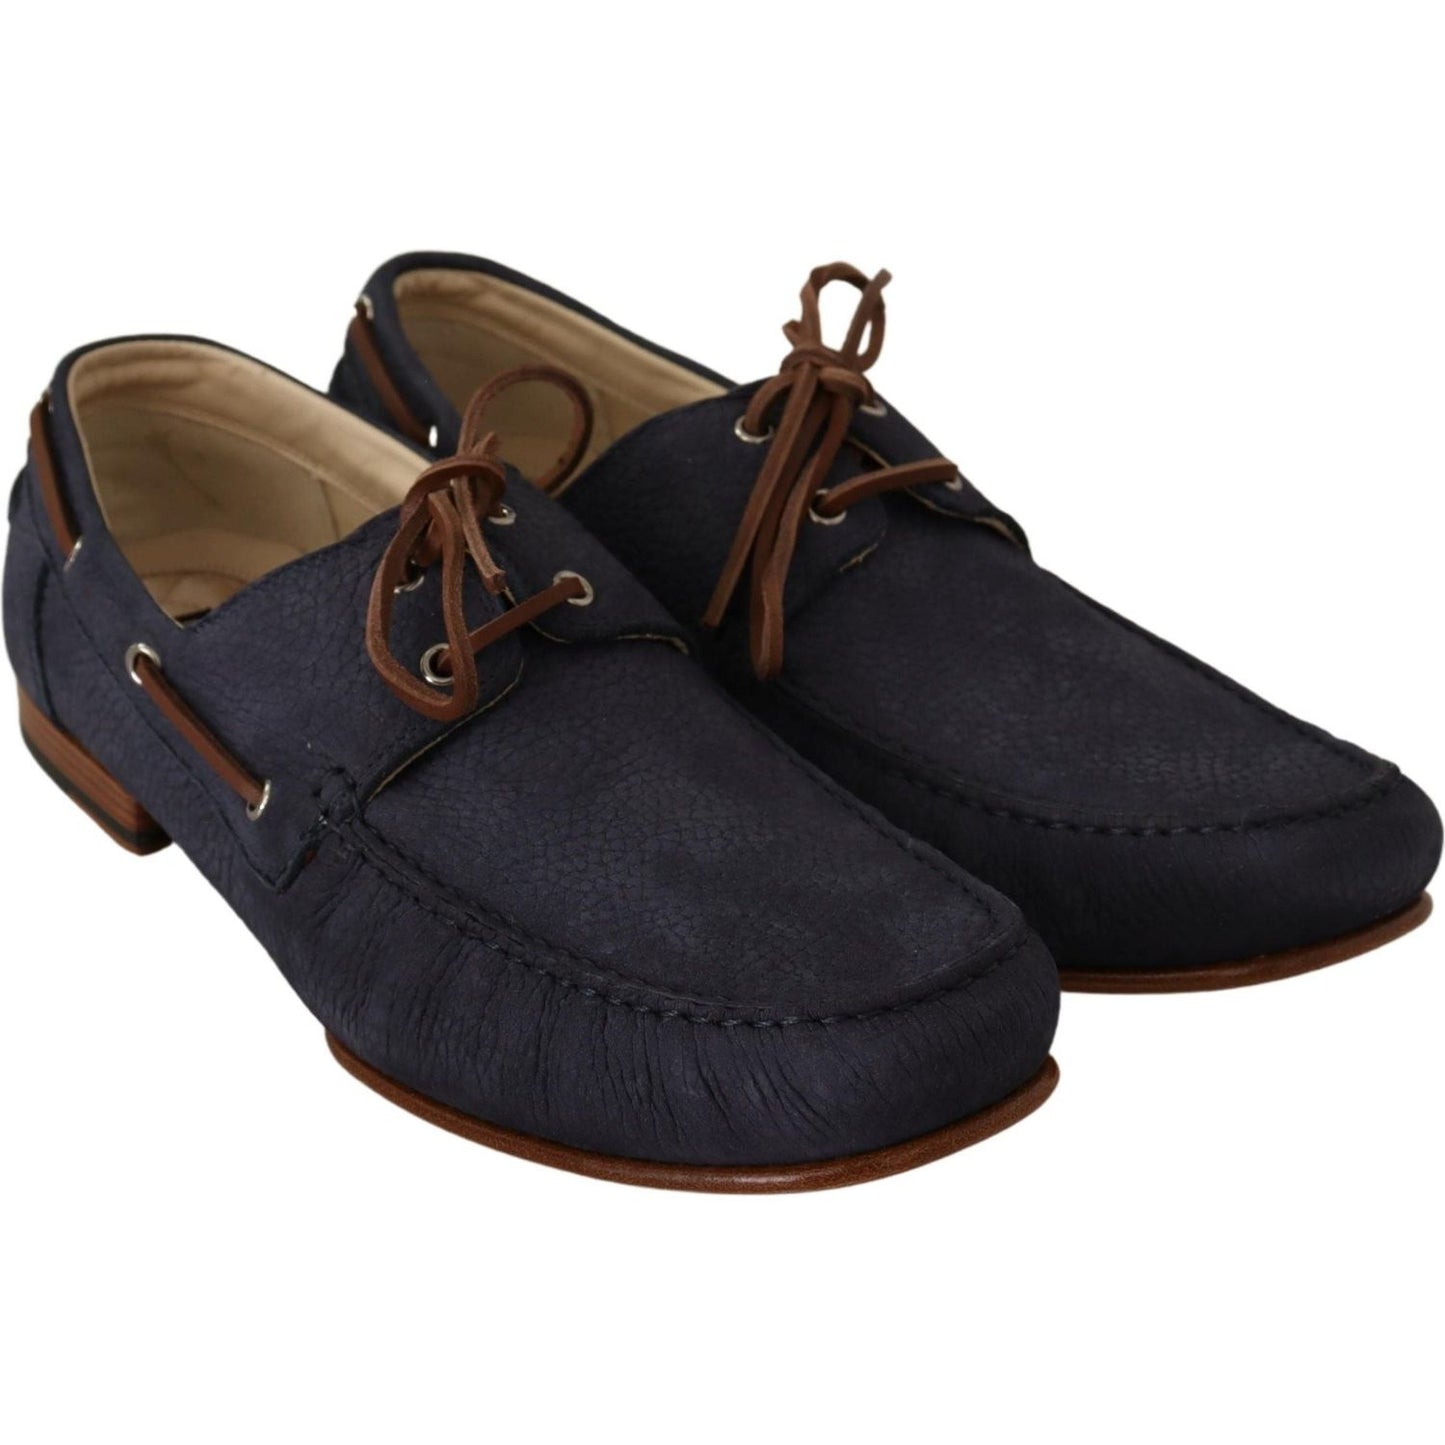 Dolce & Gabbana Elegant Blue & Brown Leather Boat Shoes MAN LOAFERS blue-leather-lace-up-men-casual-boat-shoes